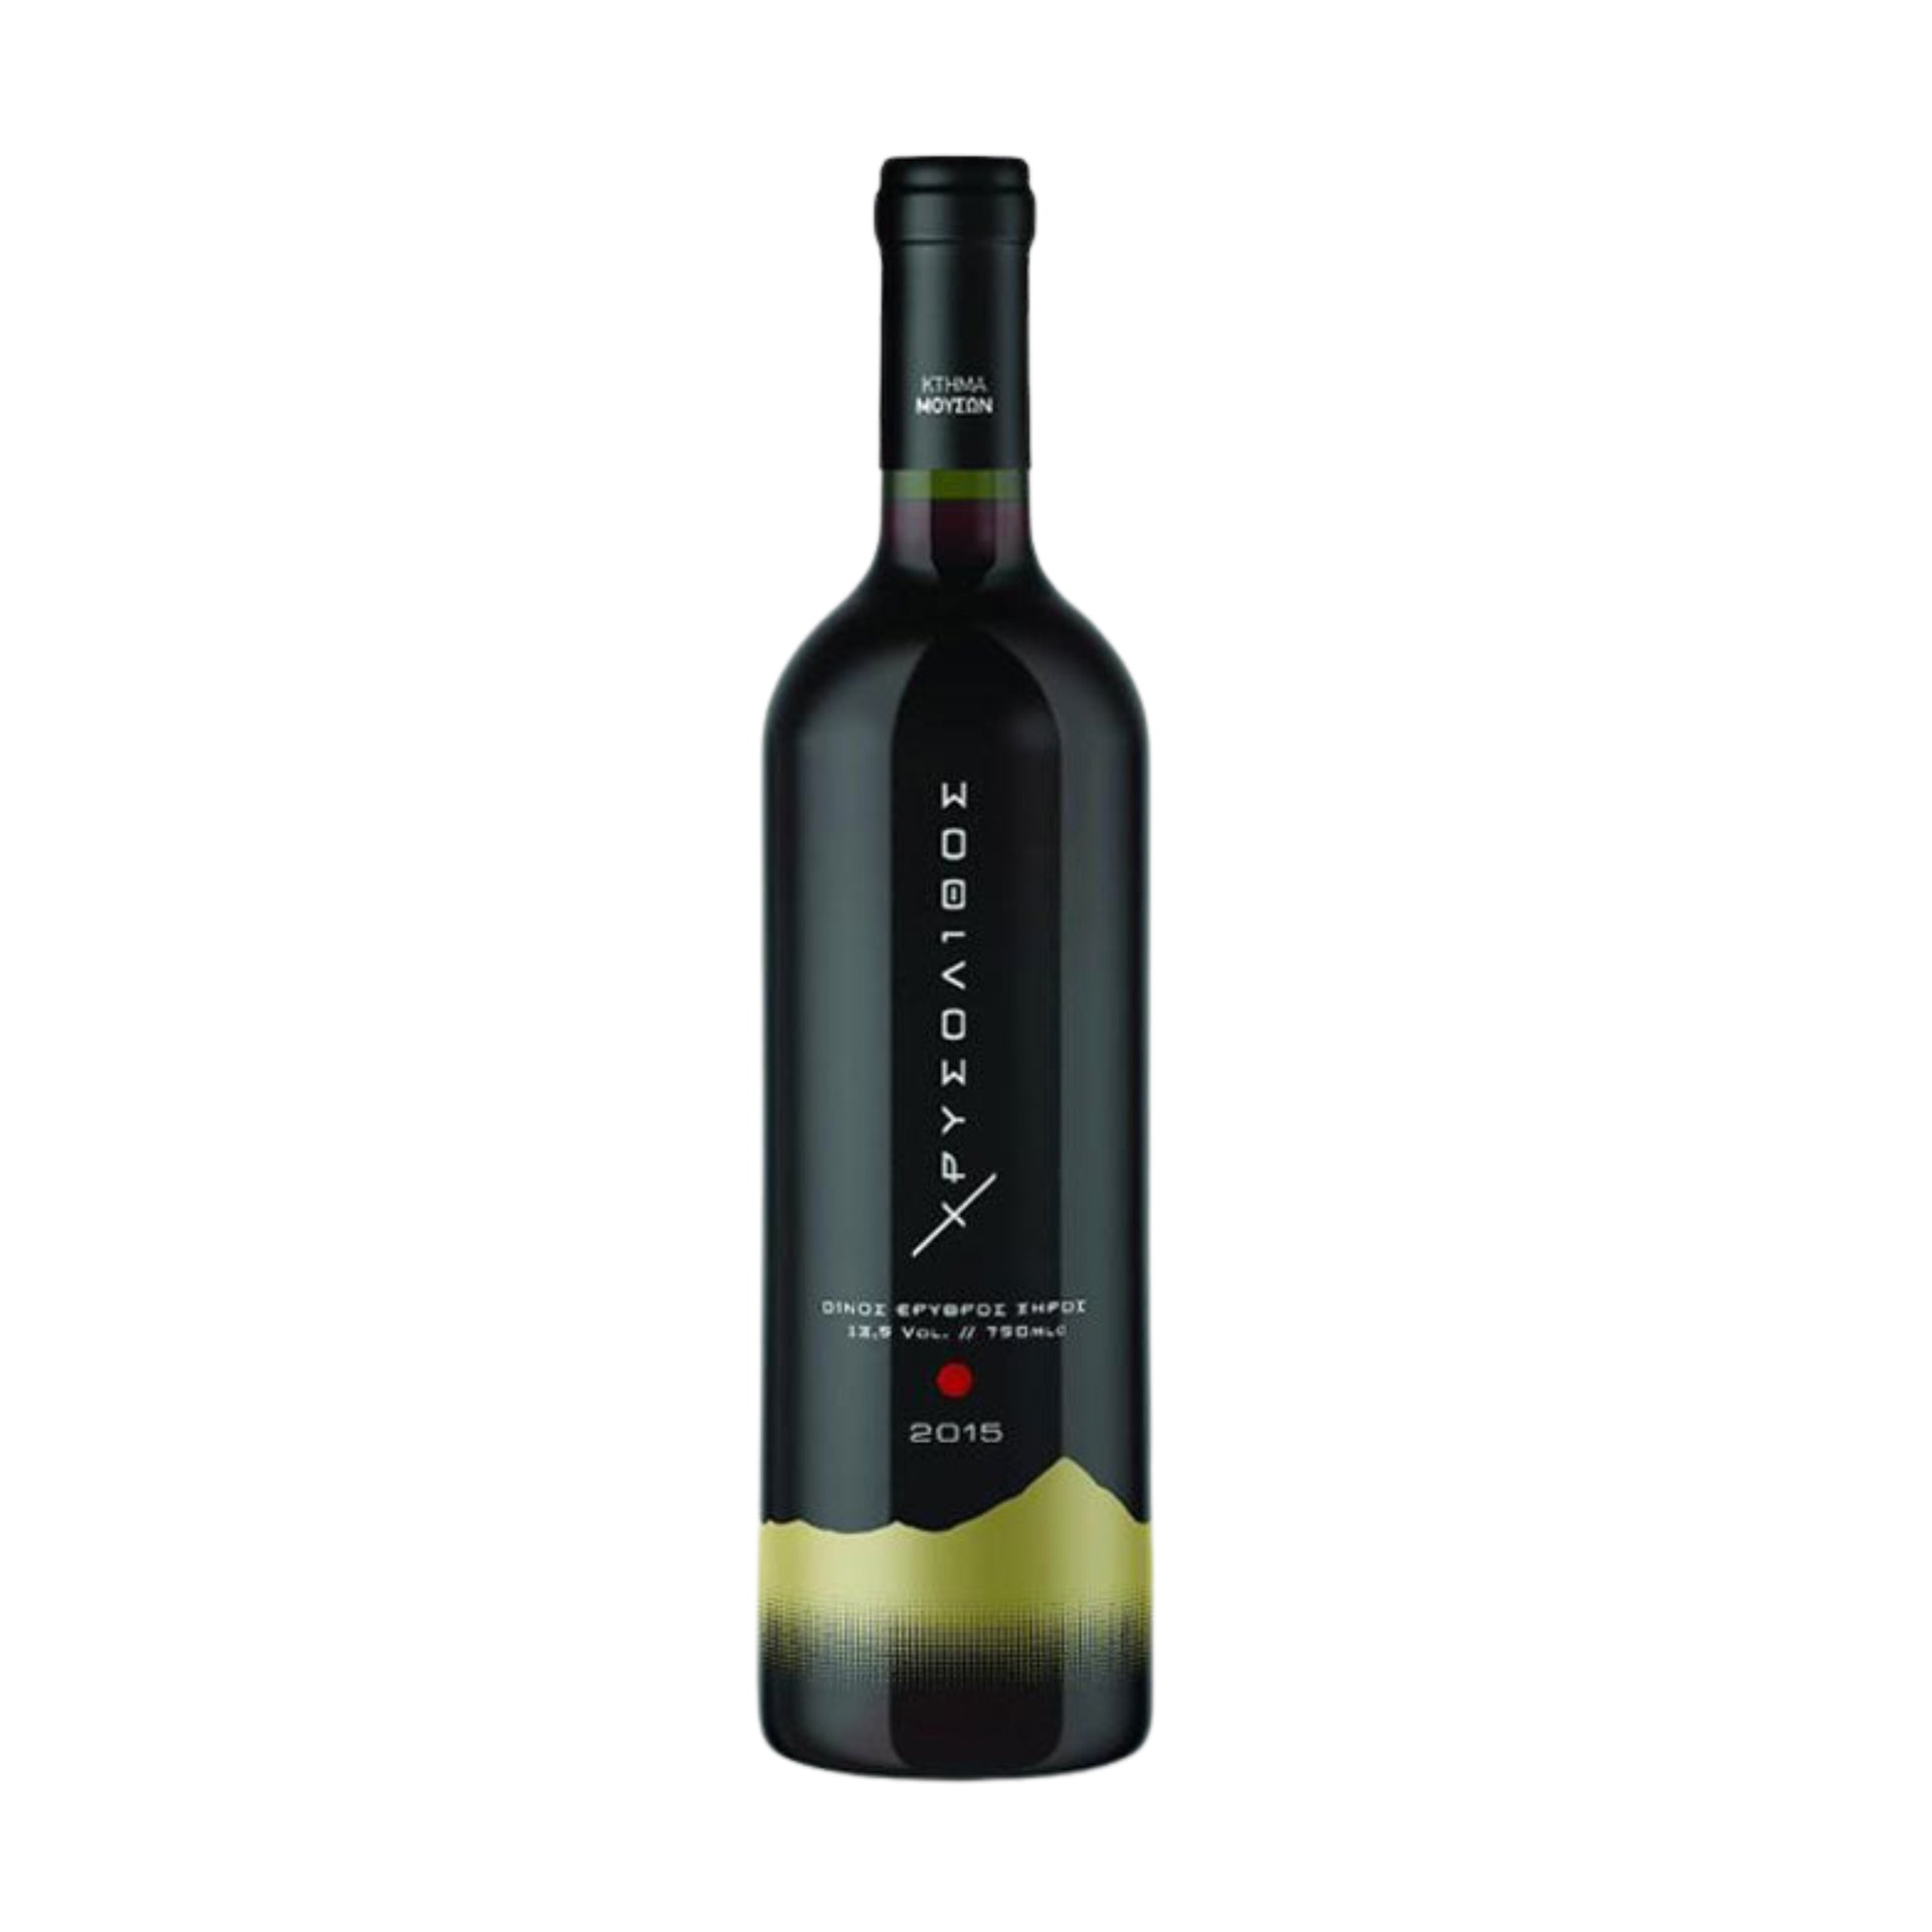 greek-products-wine-chrisolithos-red-0-75l-muses-estate